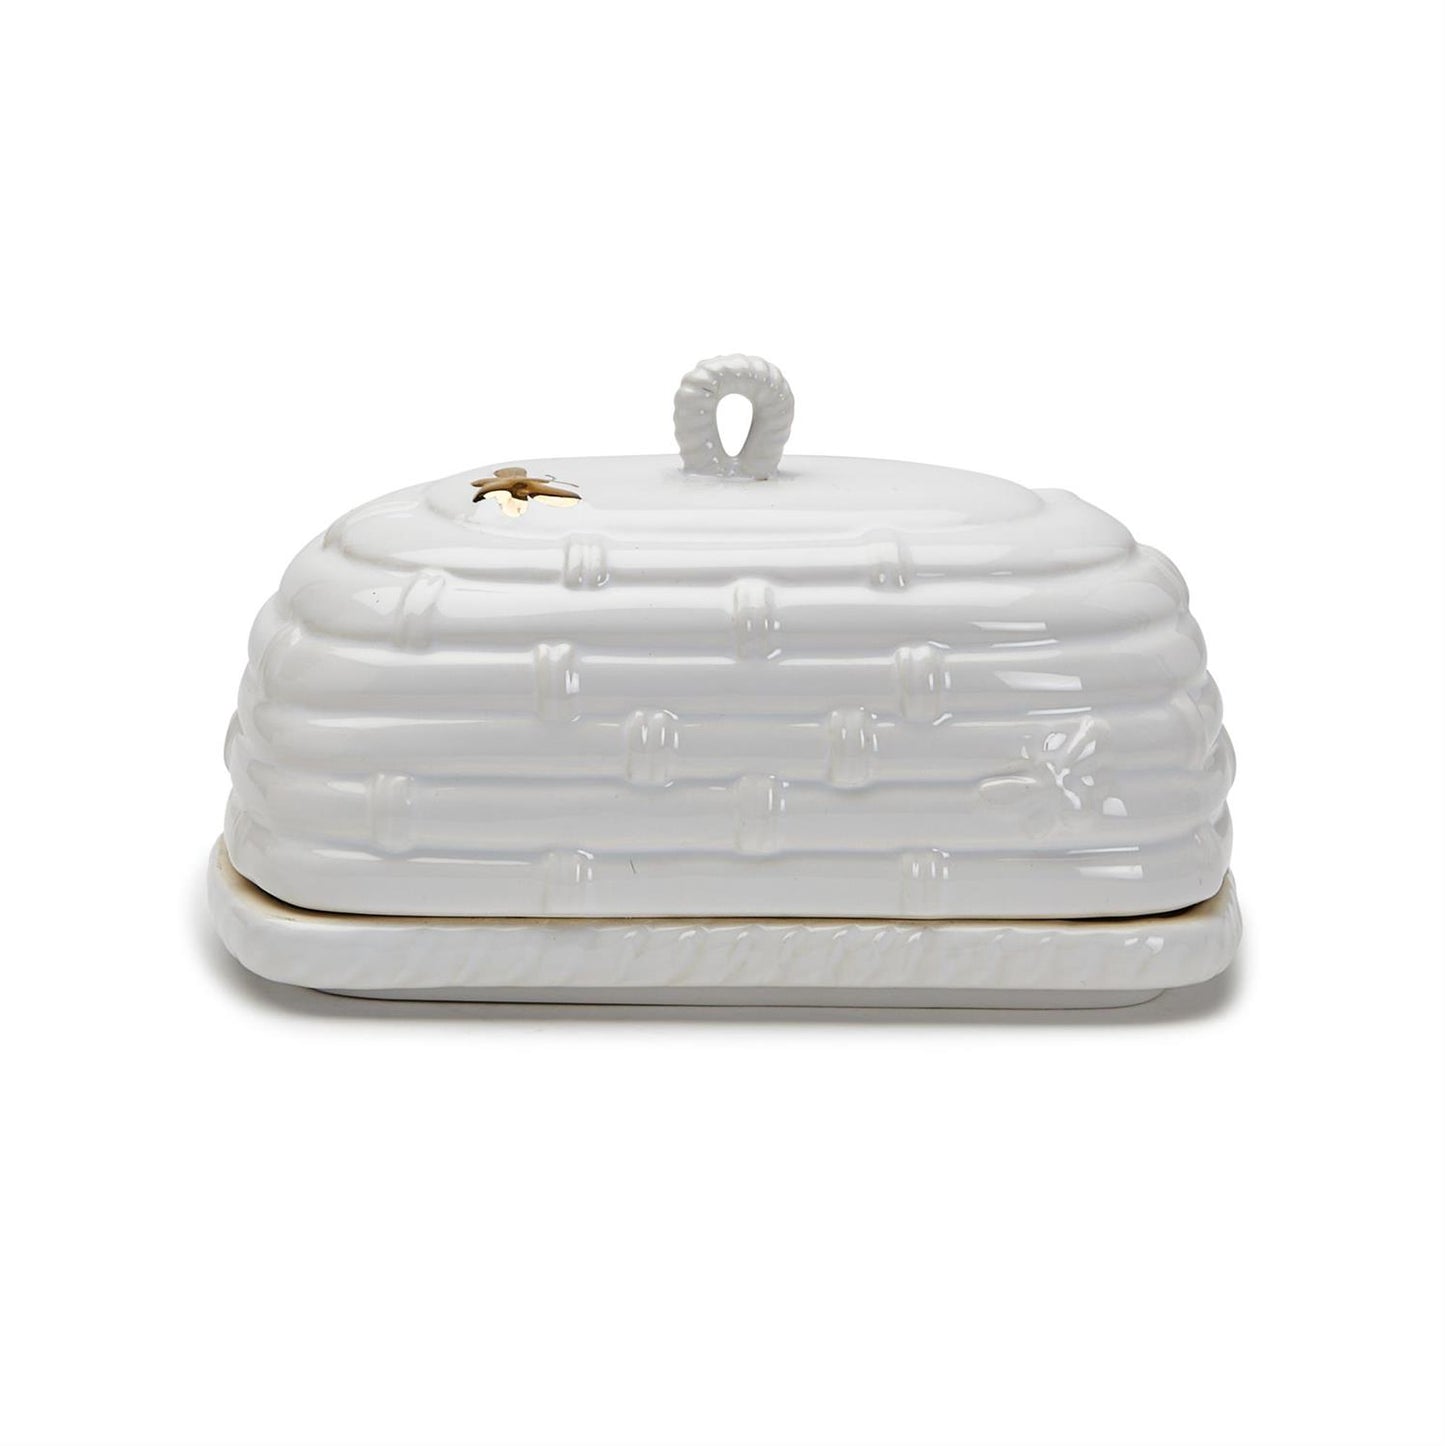 Golden Bee Covered Butter Dish